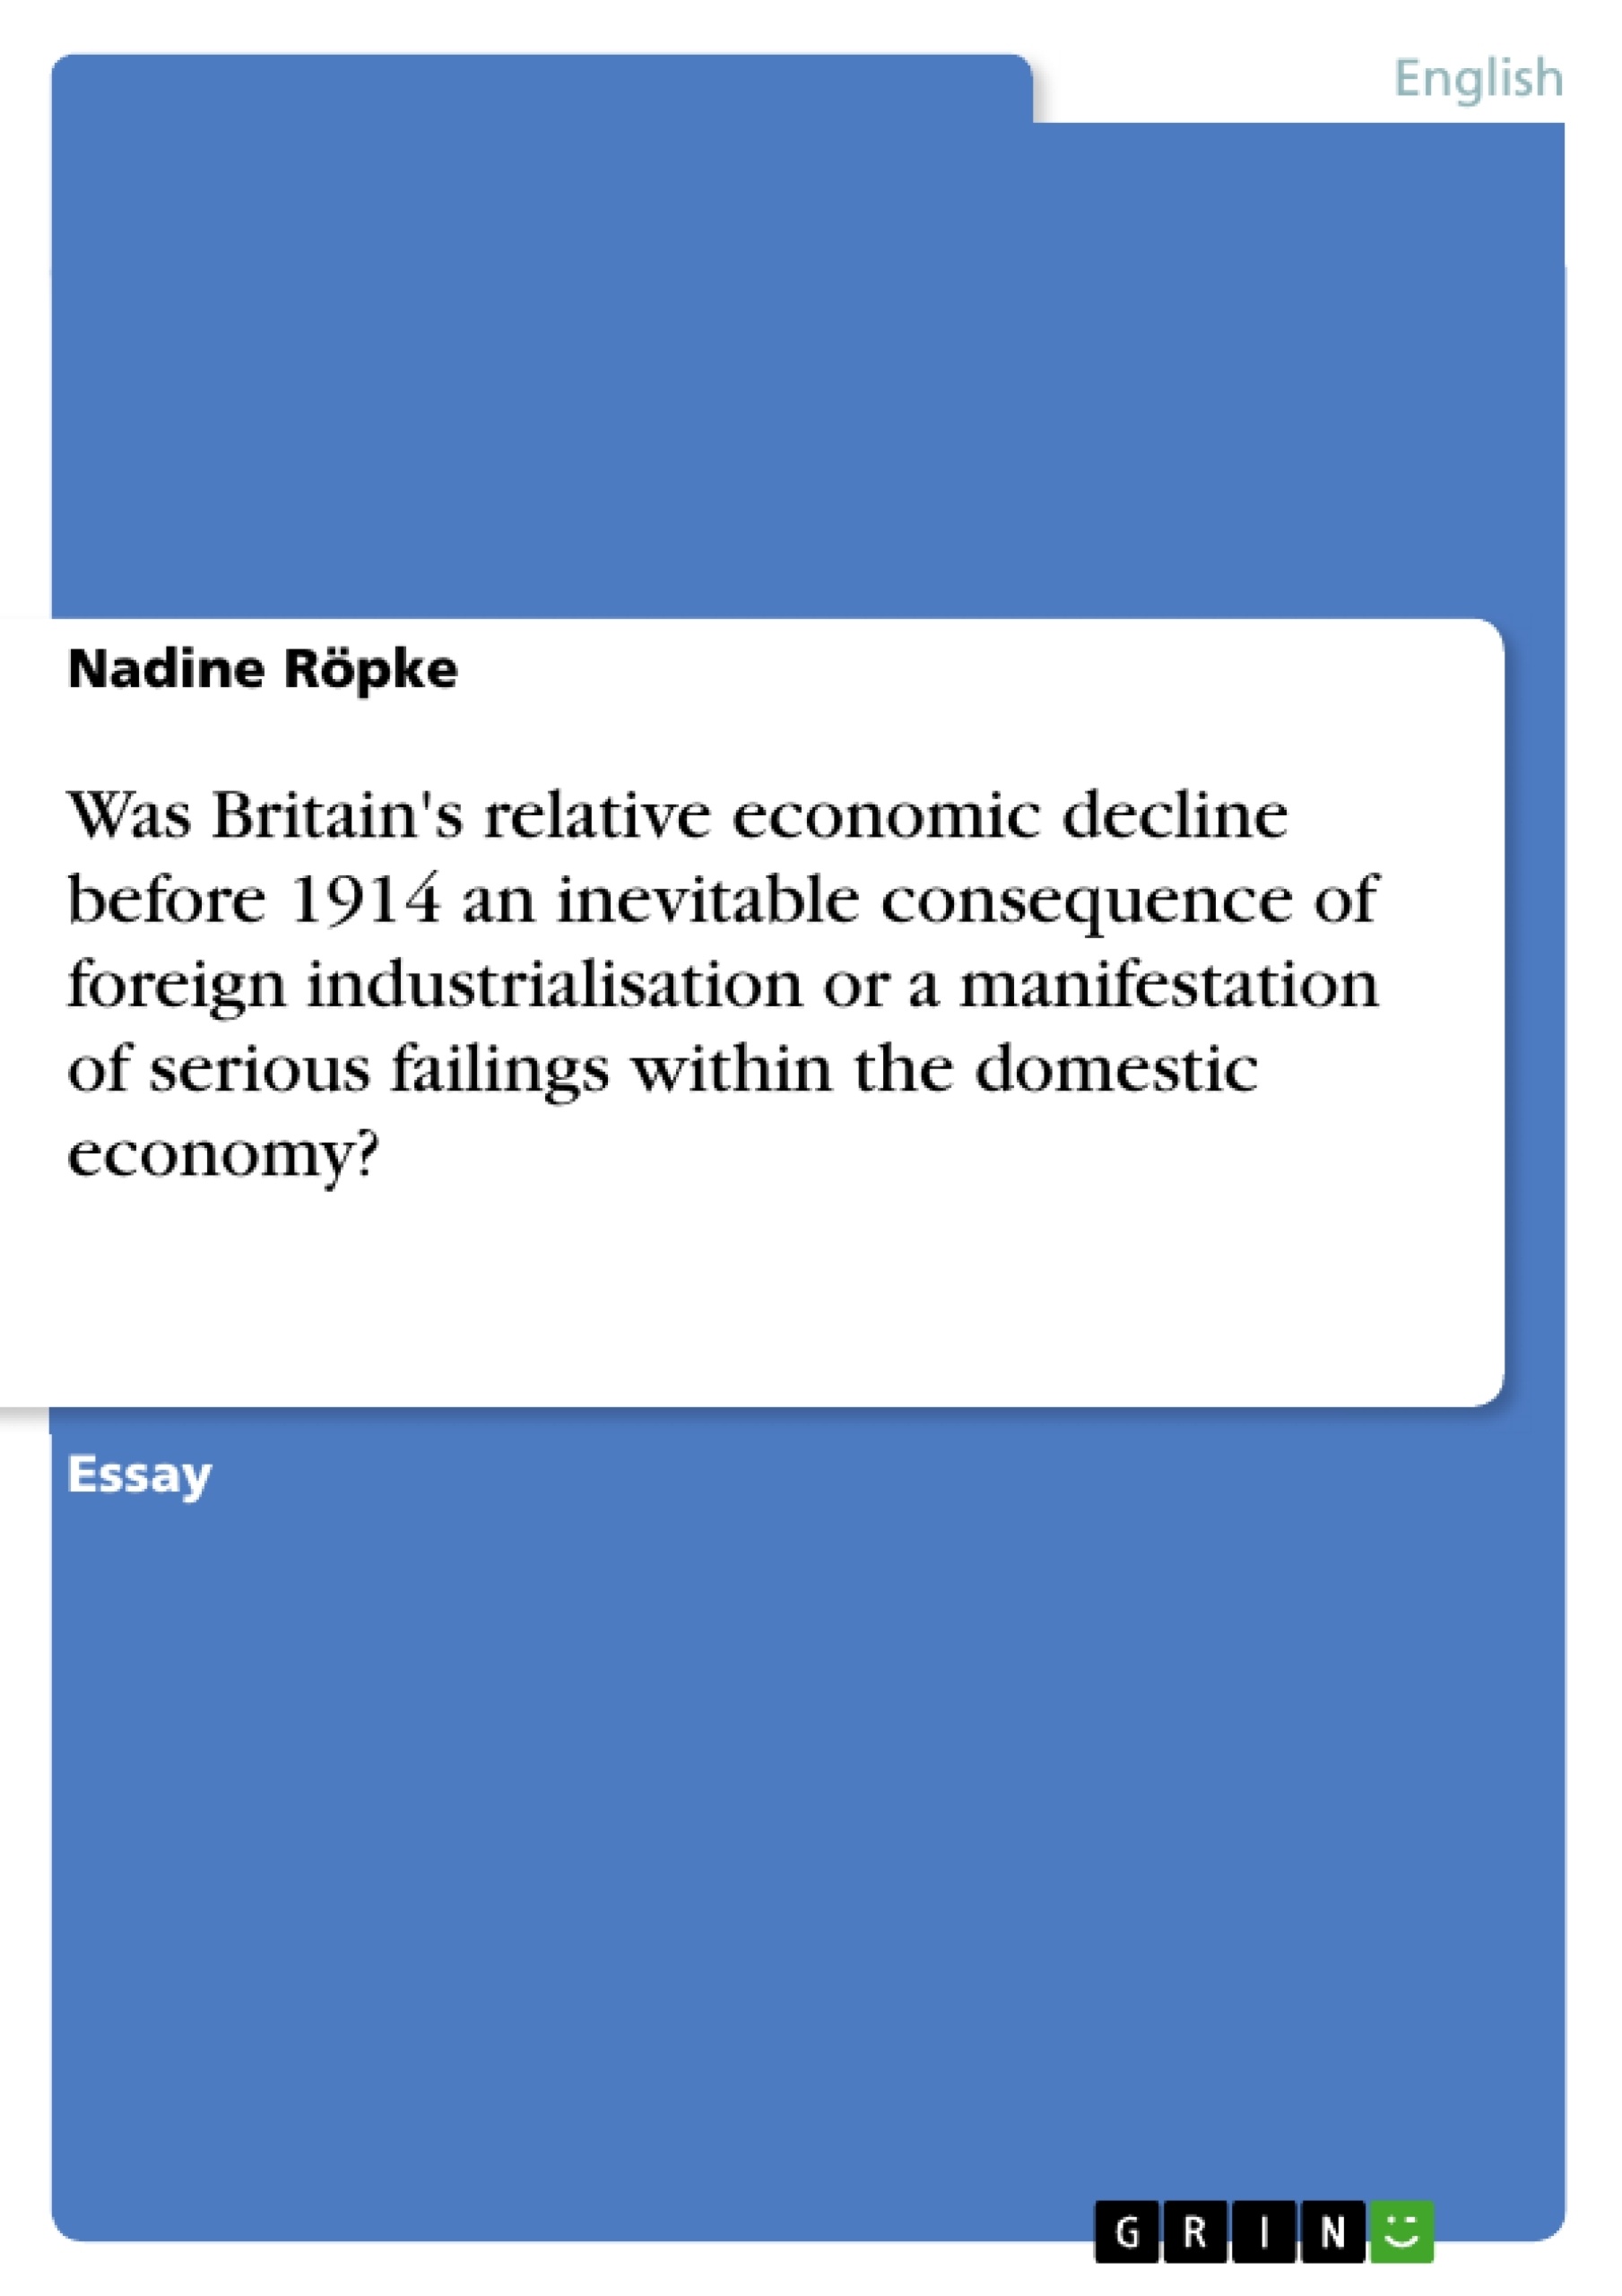 Titre: Was Britain's relative economic decline before 1914 an inevitable consequence of foreign industrialisation or a manifestation of serious failings within the domestic economy?